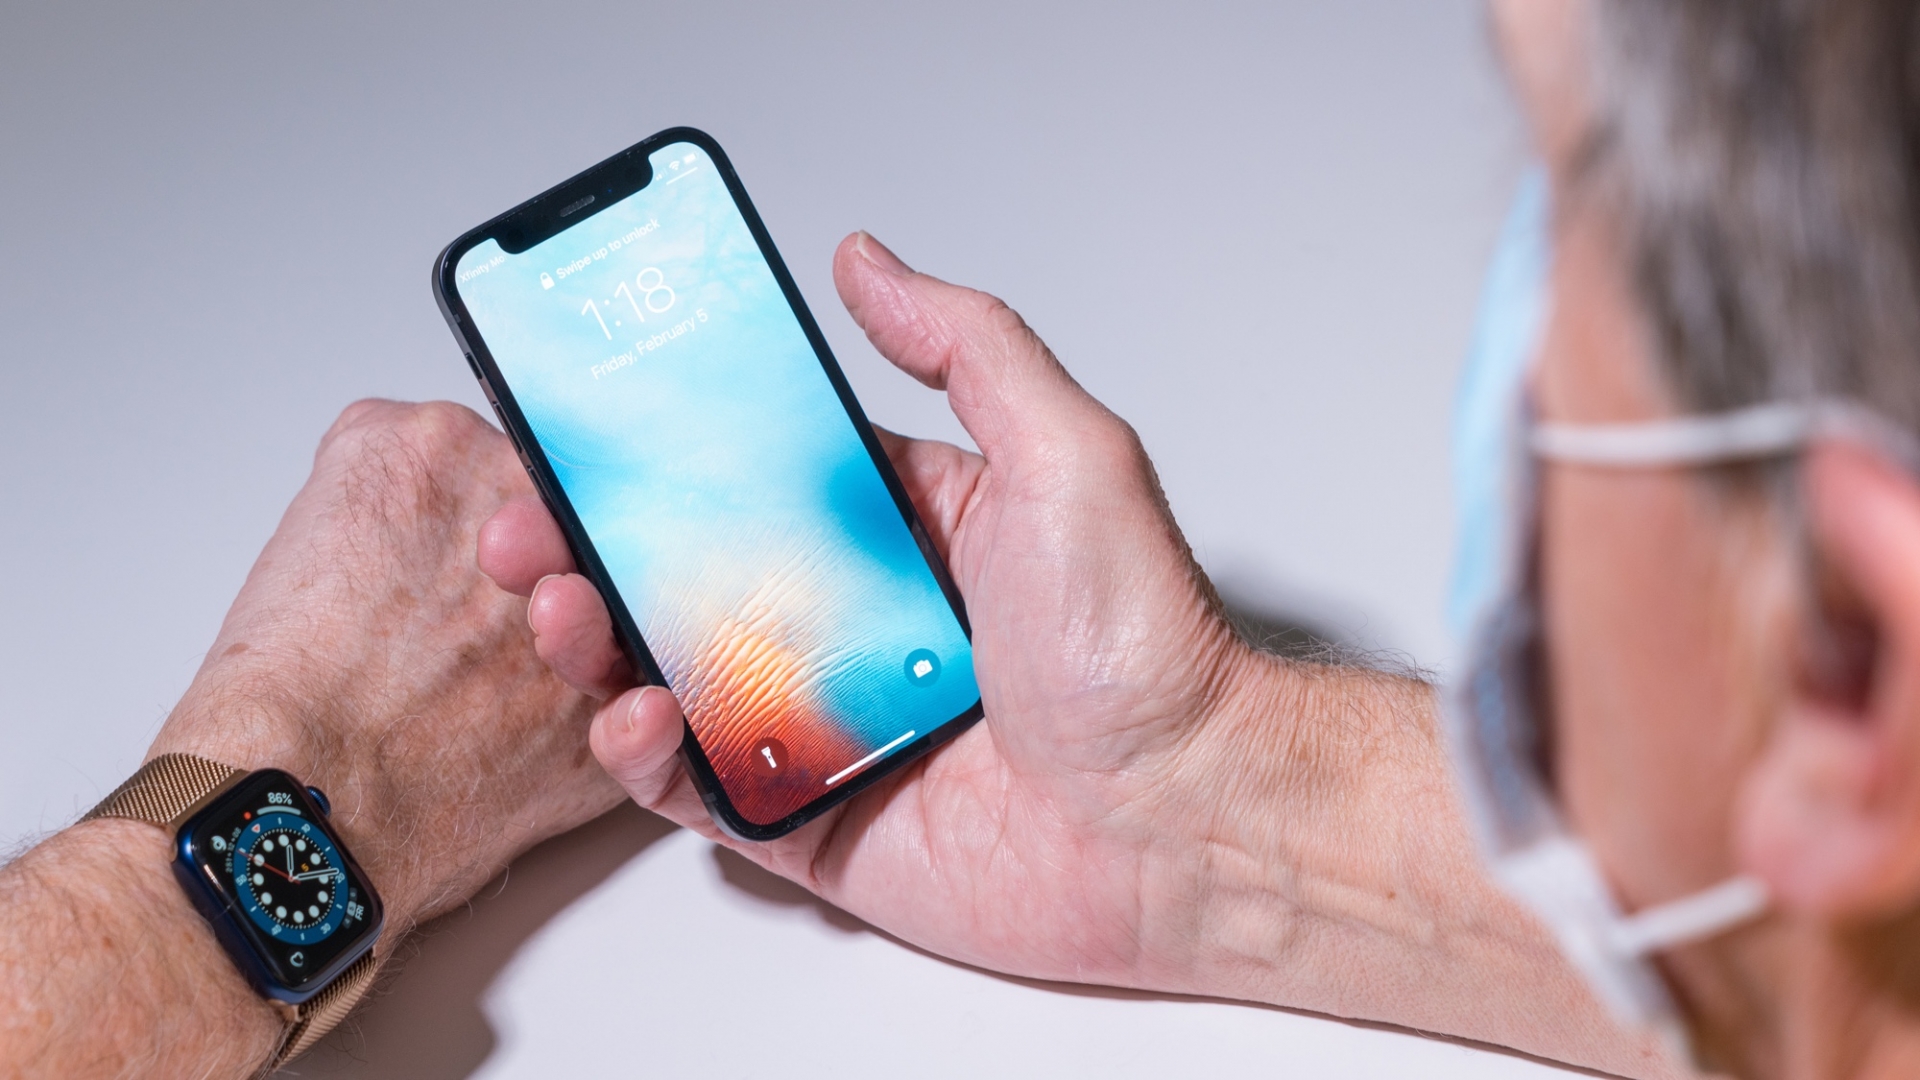 Unlocking Face ID. Photo: Tom's Guide